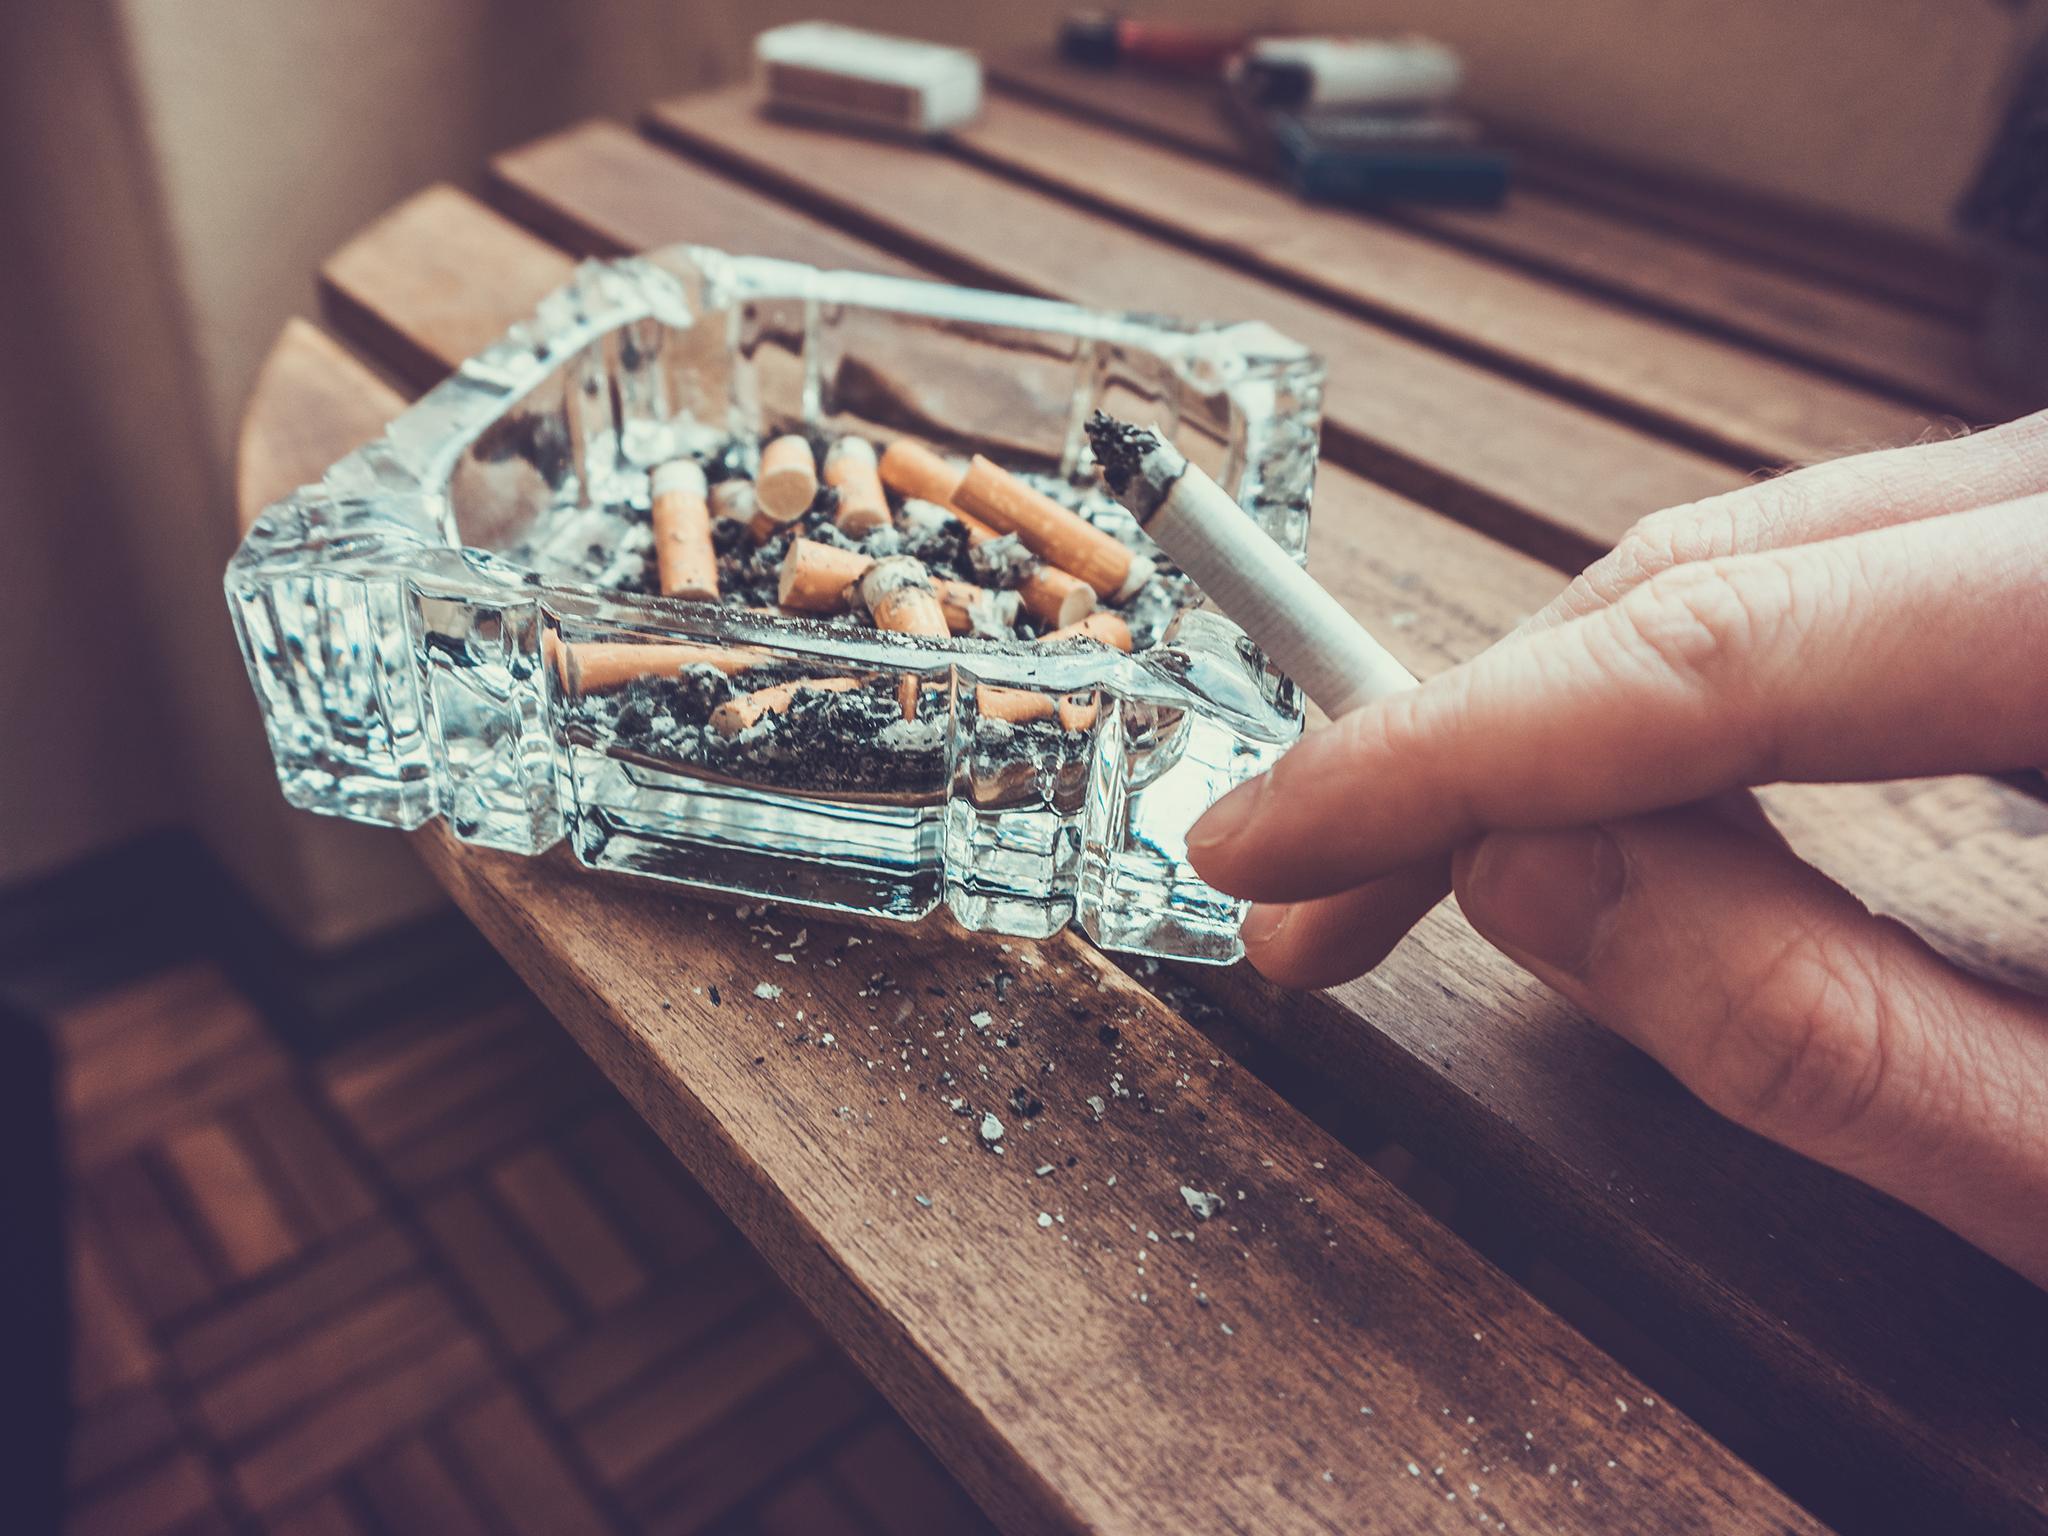 Smoking in all enclosed work places was banned in England in 2007